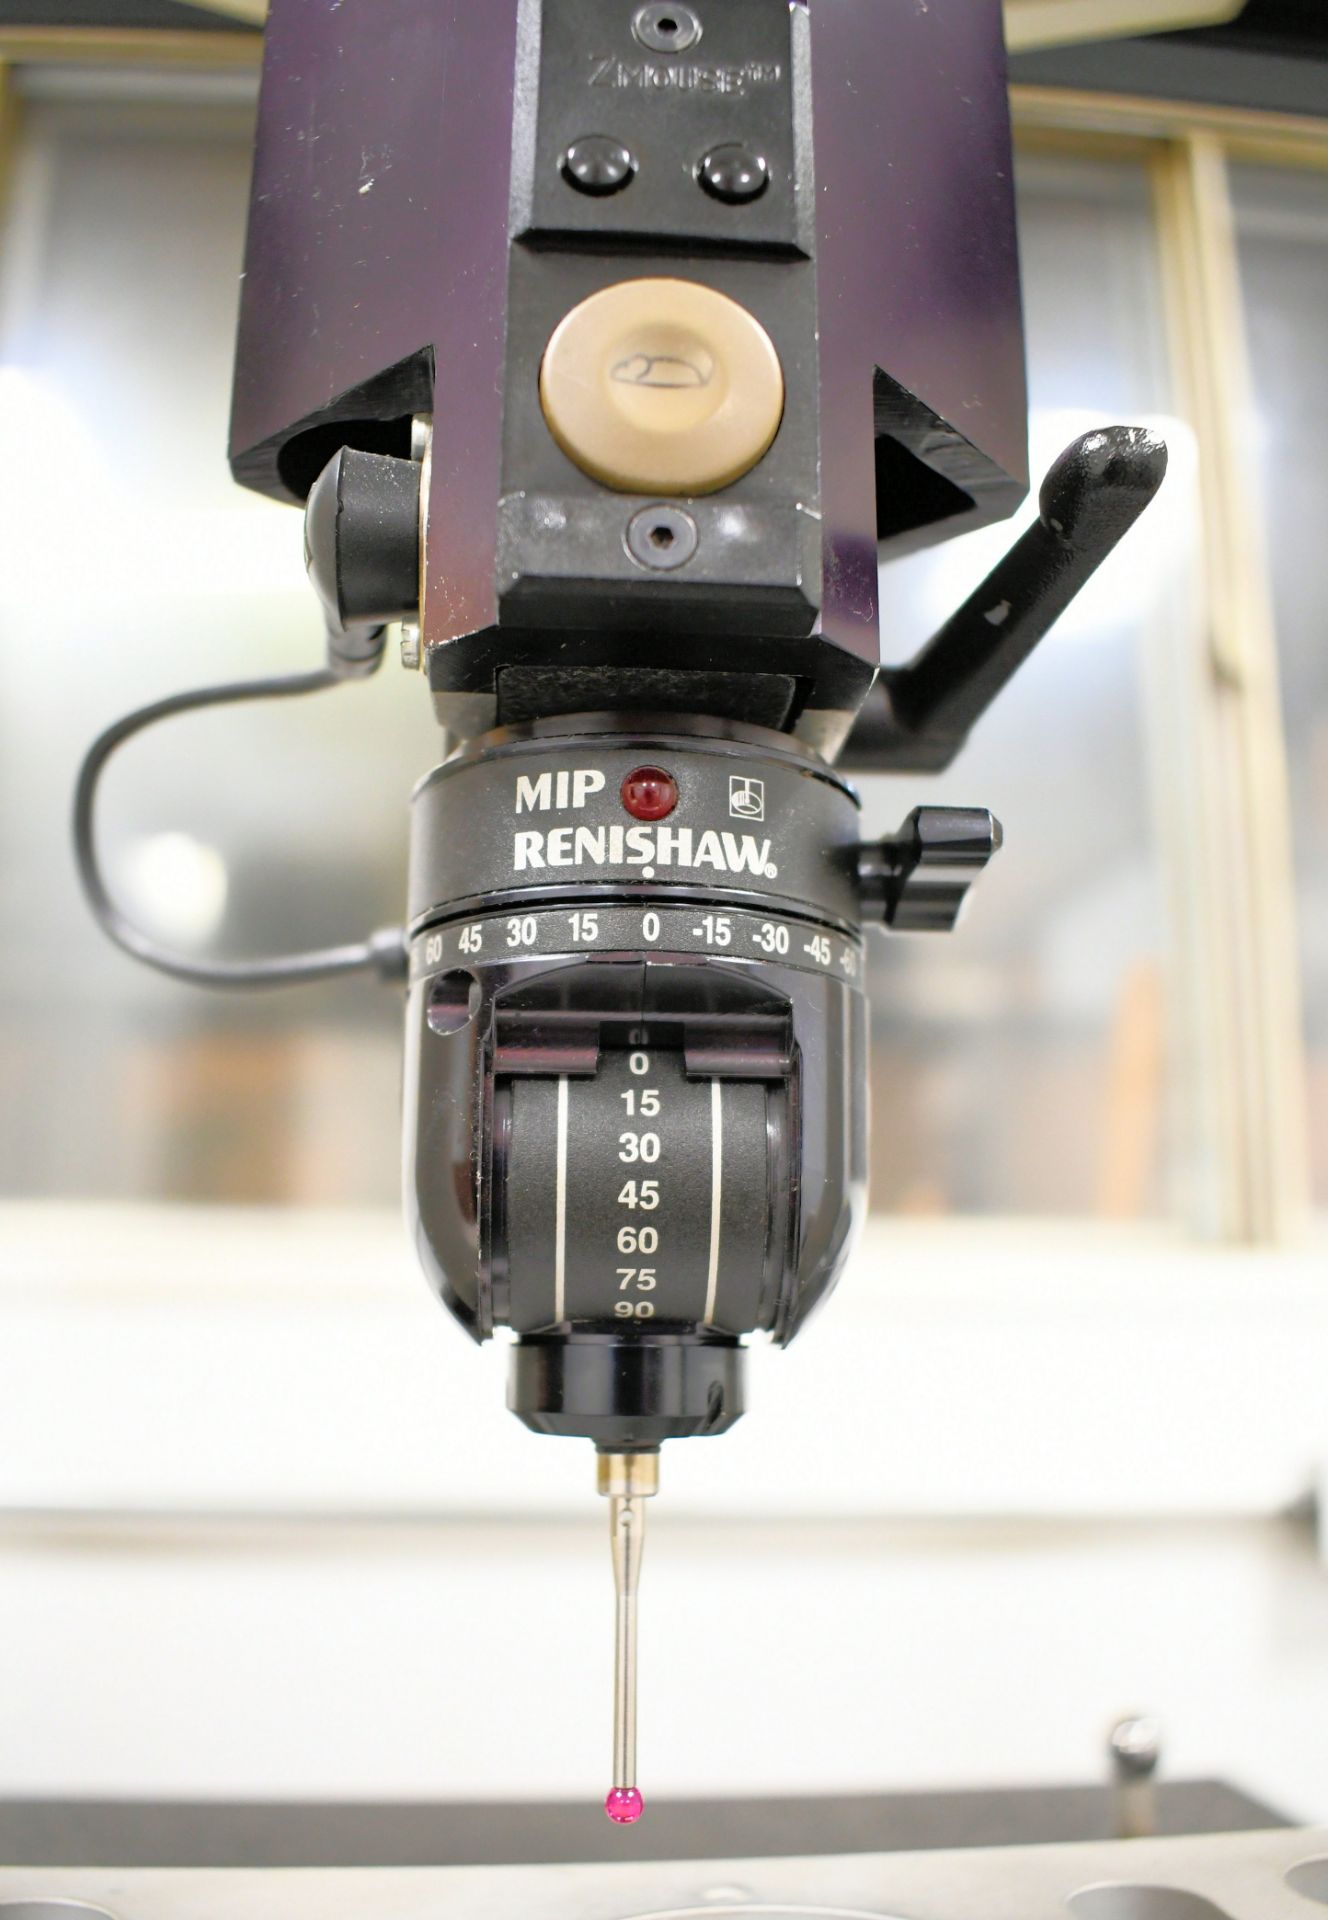 Brown & Sharpe MicroVal Coordinate Measuring Machine, S/n N/a, Renishaw MIP Ruby Tipped Probe - Image 4 of 5